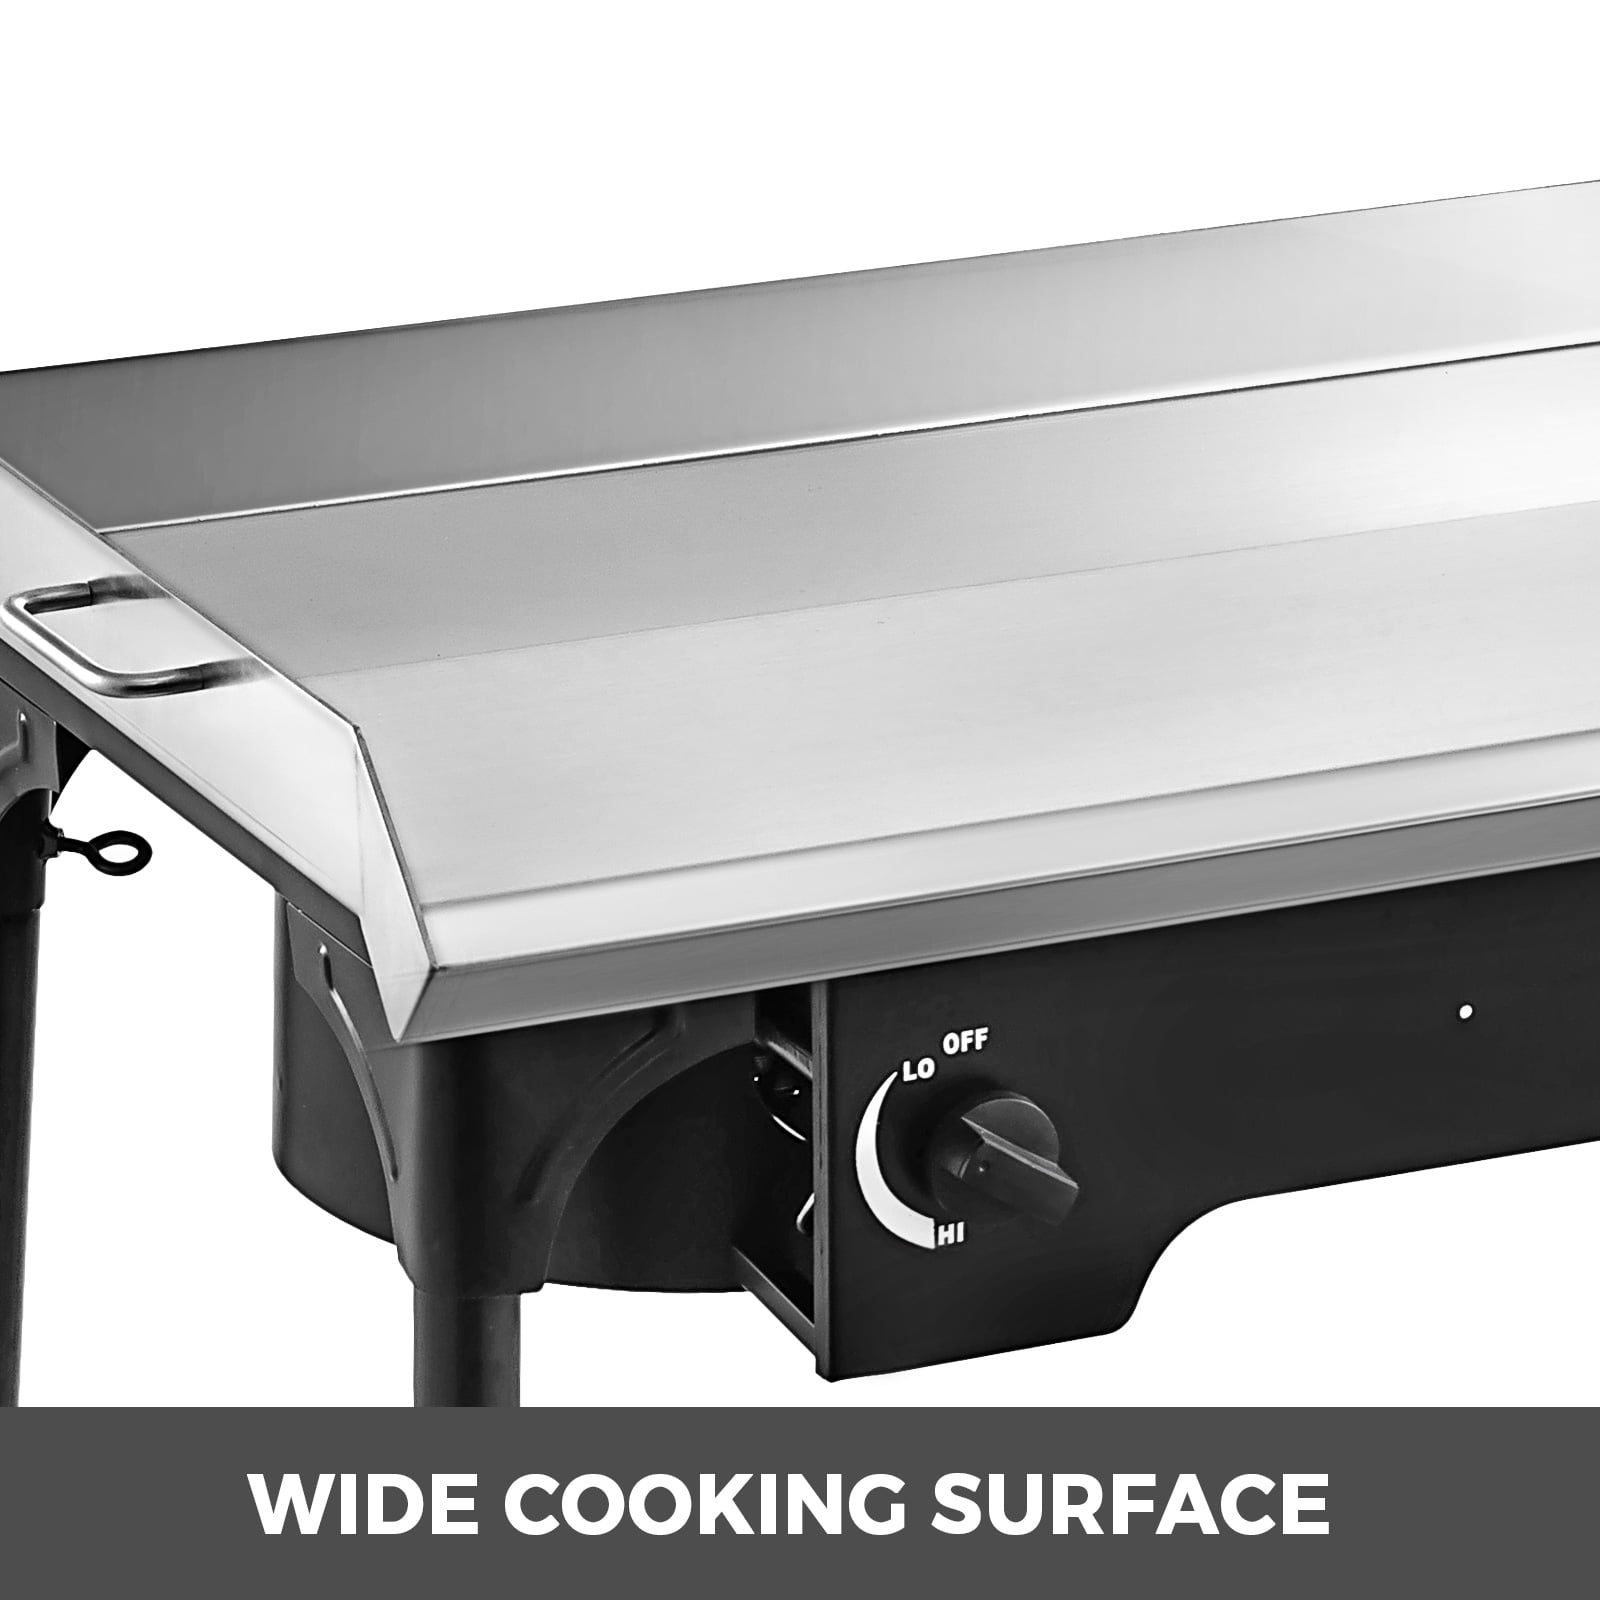 DOBADN Stove Top Flat Griddle, 18'' x 10'' Nonstick Double Burner Griddle  Pancake Griddle for Gas Grill or Electric Stovetop, Aluminum